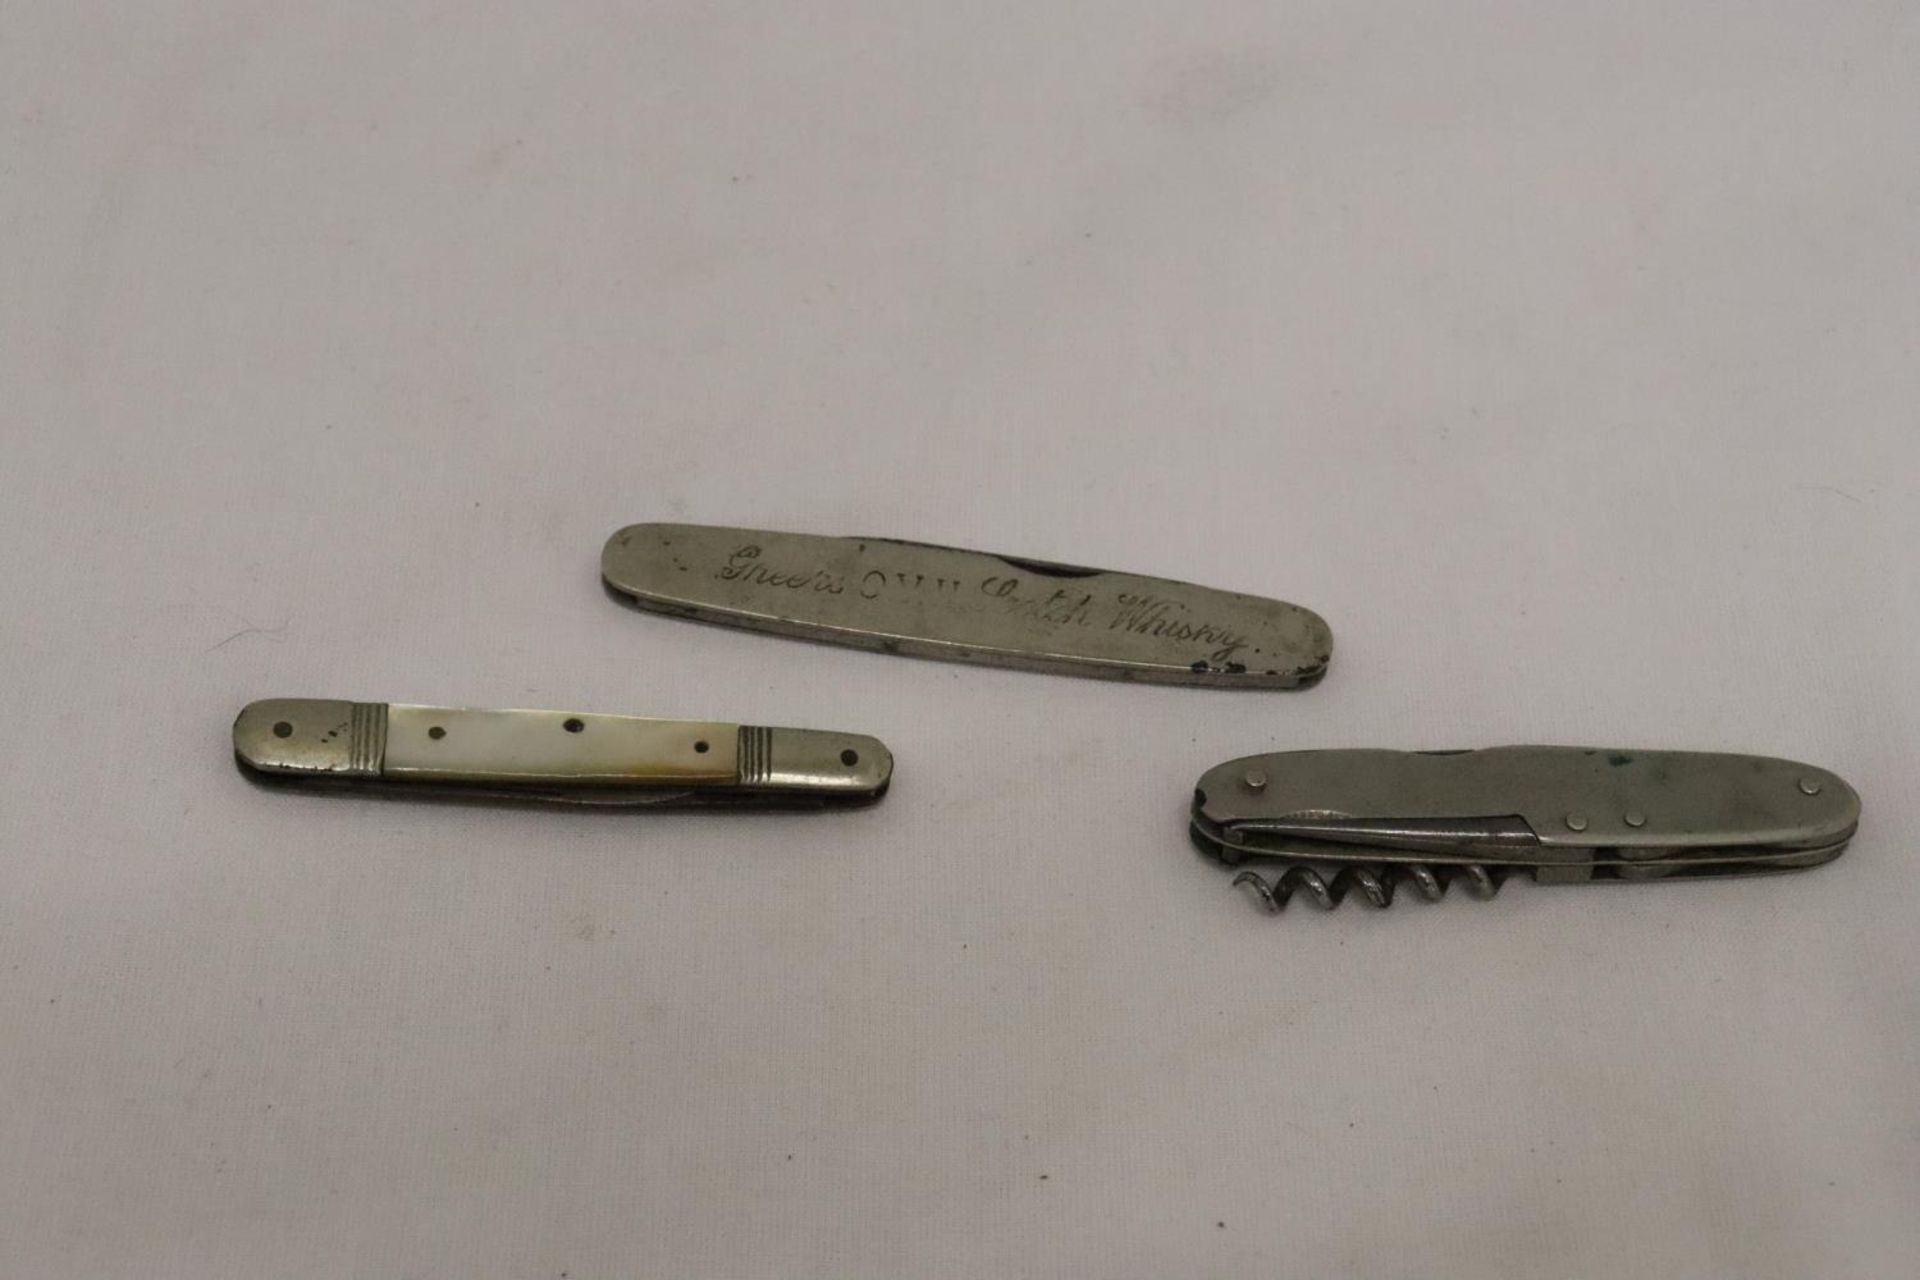 THREE VINTAGE PENKNIVES TO INCLUDE ONE MARKED 'GREERS OVH SCOTCH WHISKY' - Image 3 of 3